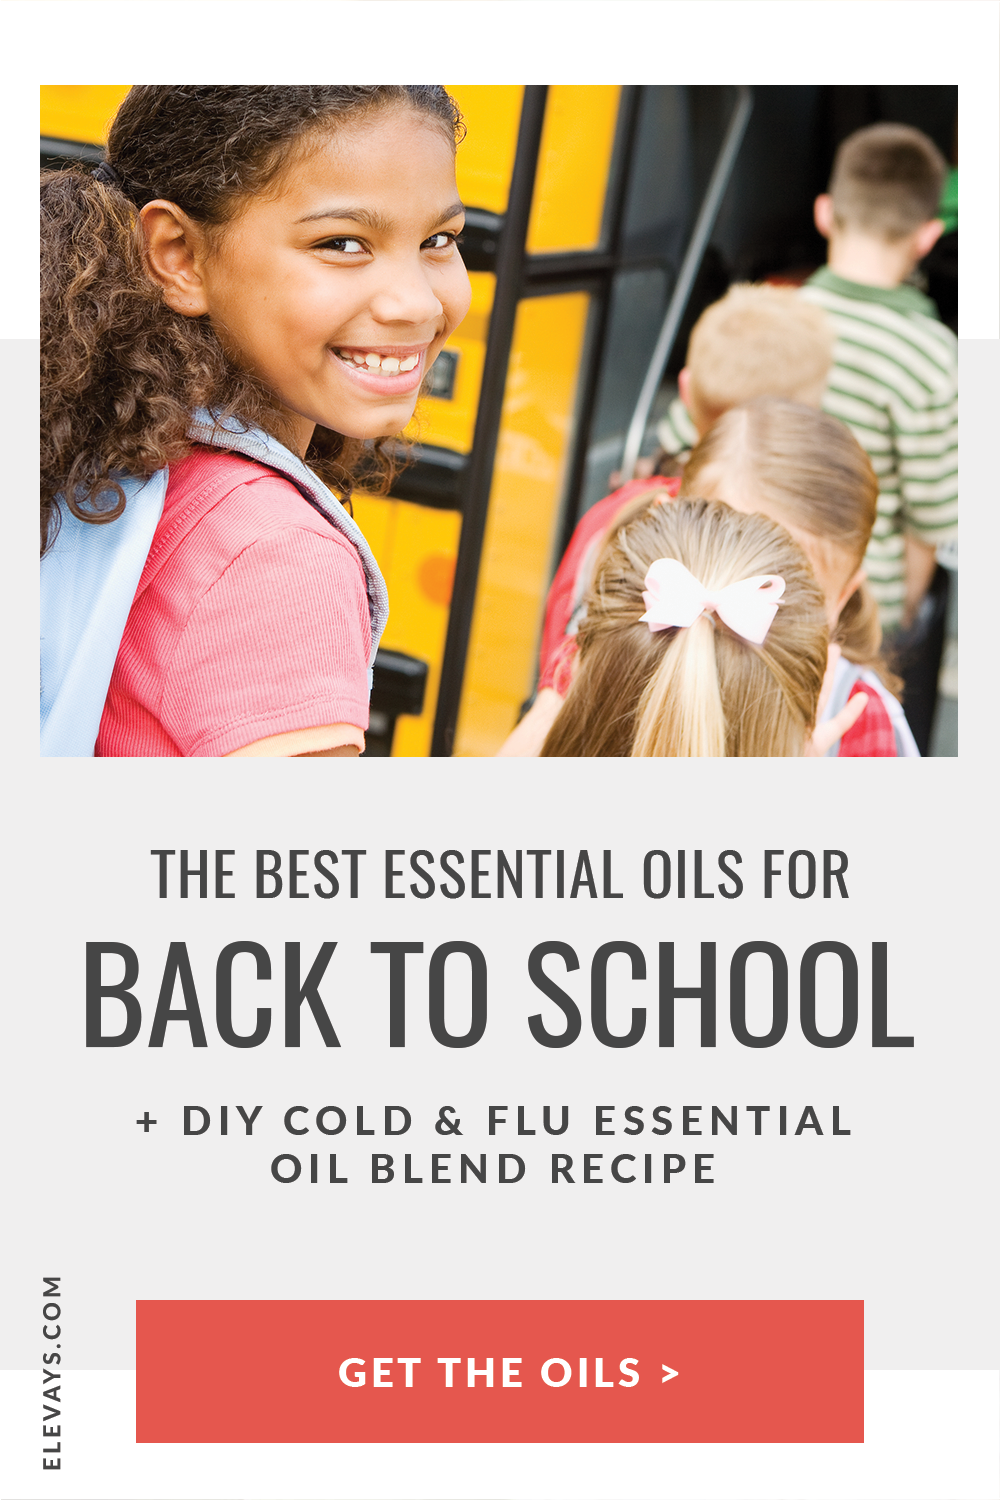 The Best Essential Oils to Have for Kids & Back to School